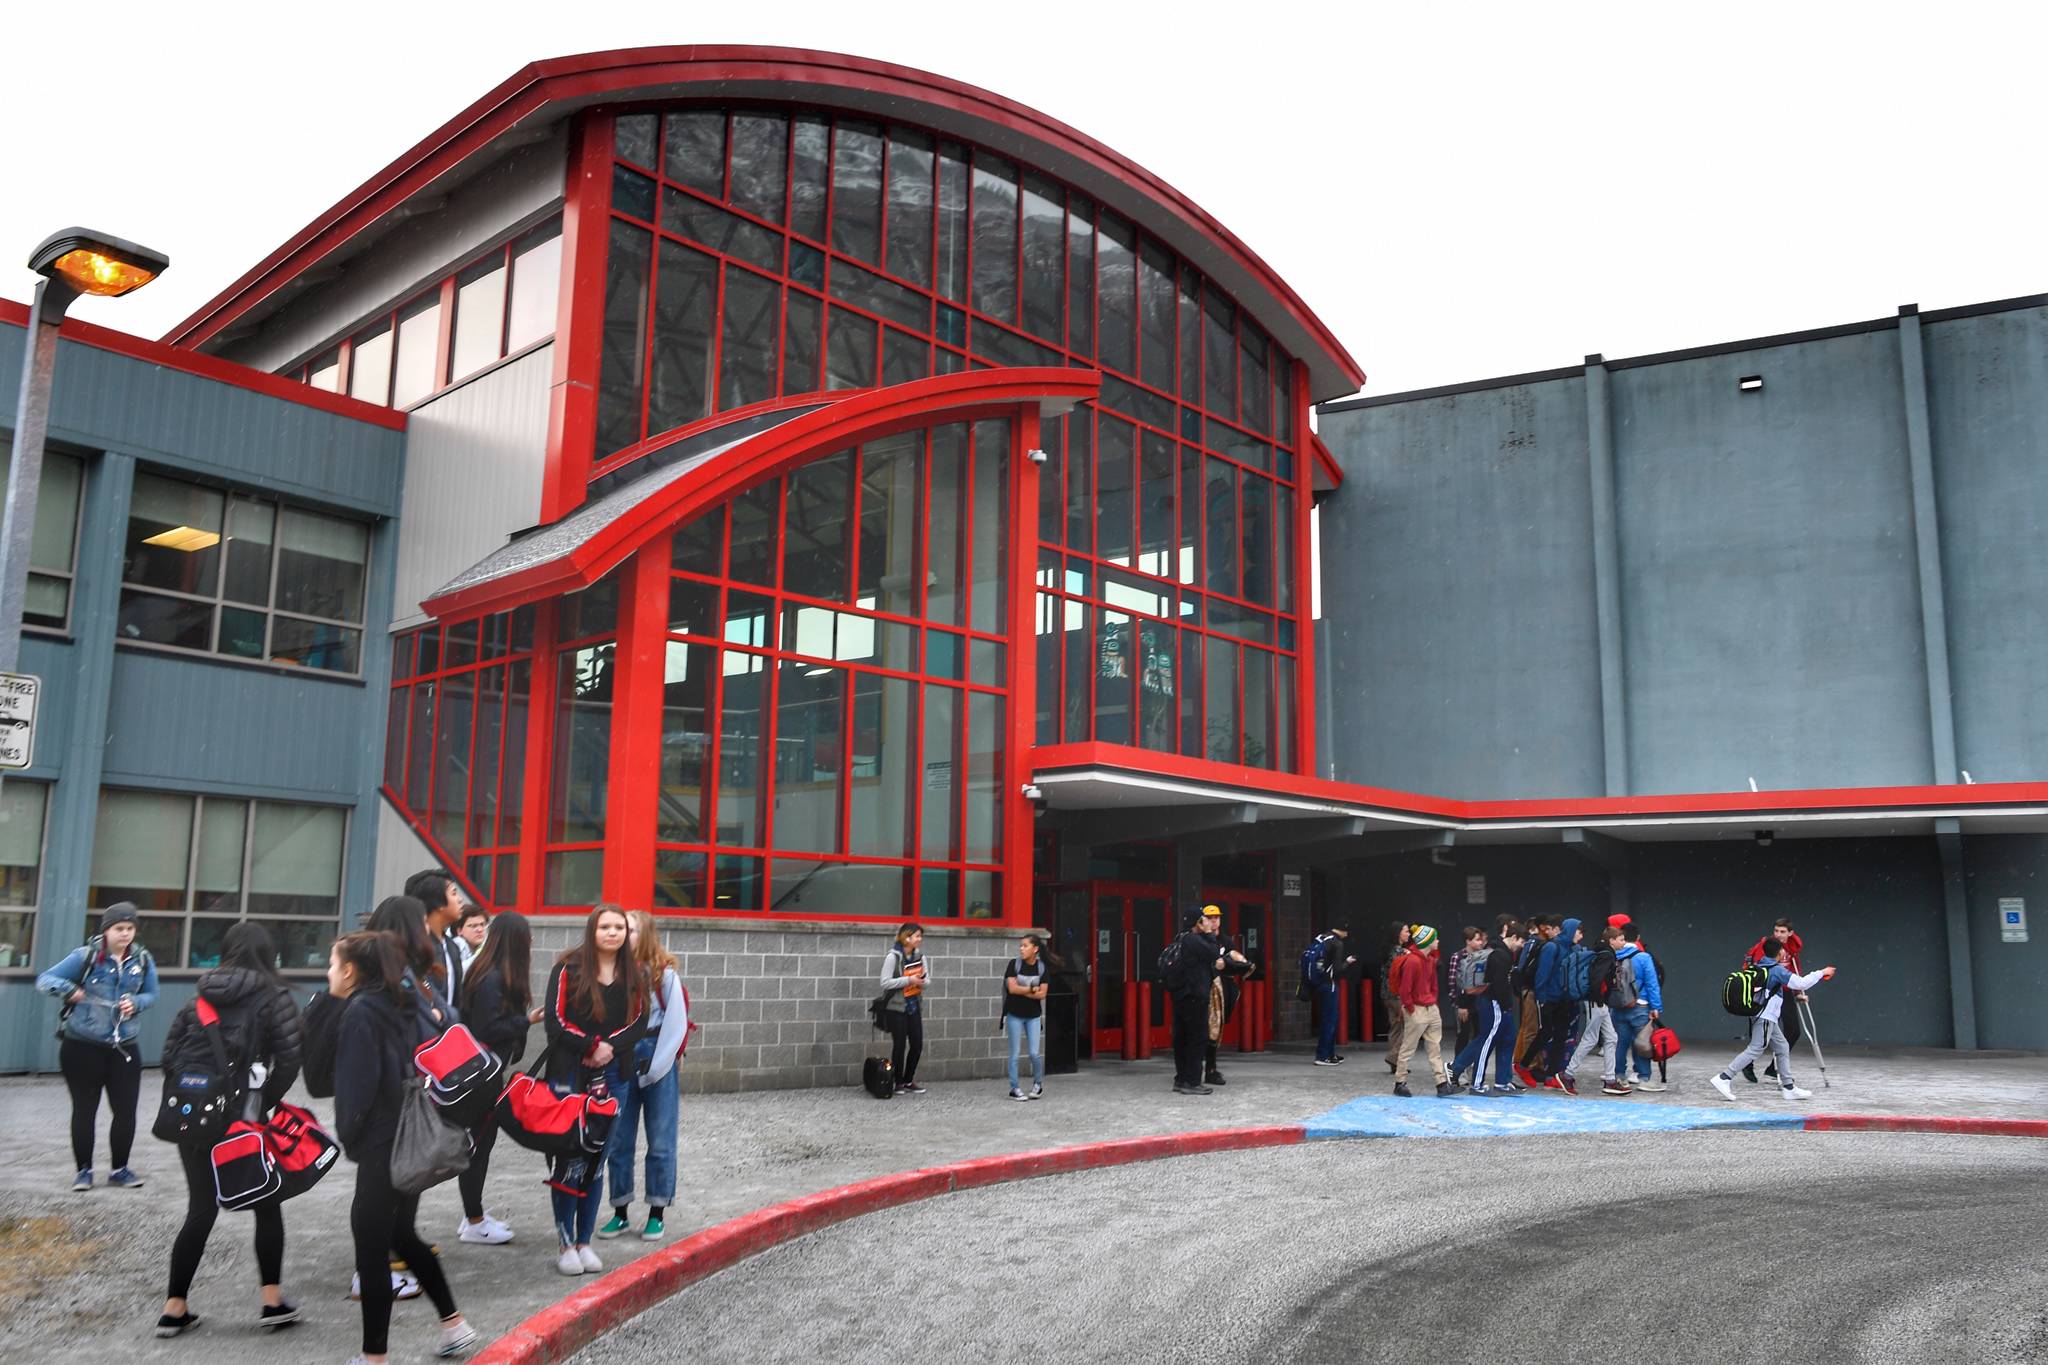 Juneau-Douglas High School students wait for rides home after malfunctioning boiler caused the school to close early on Monday, Feb. 4, 2019. (Michael Penn | Juneau Empire)